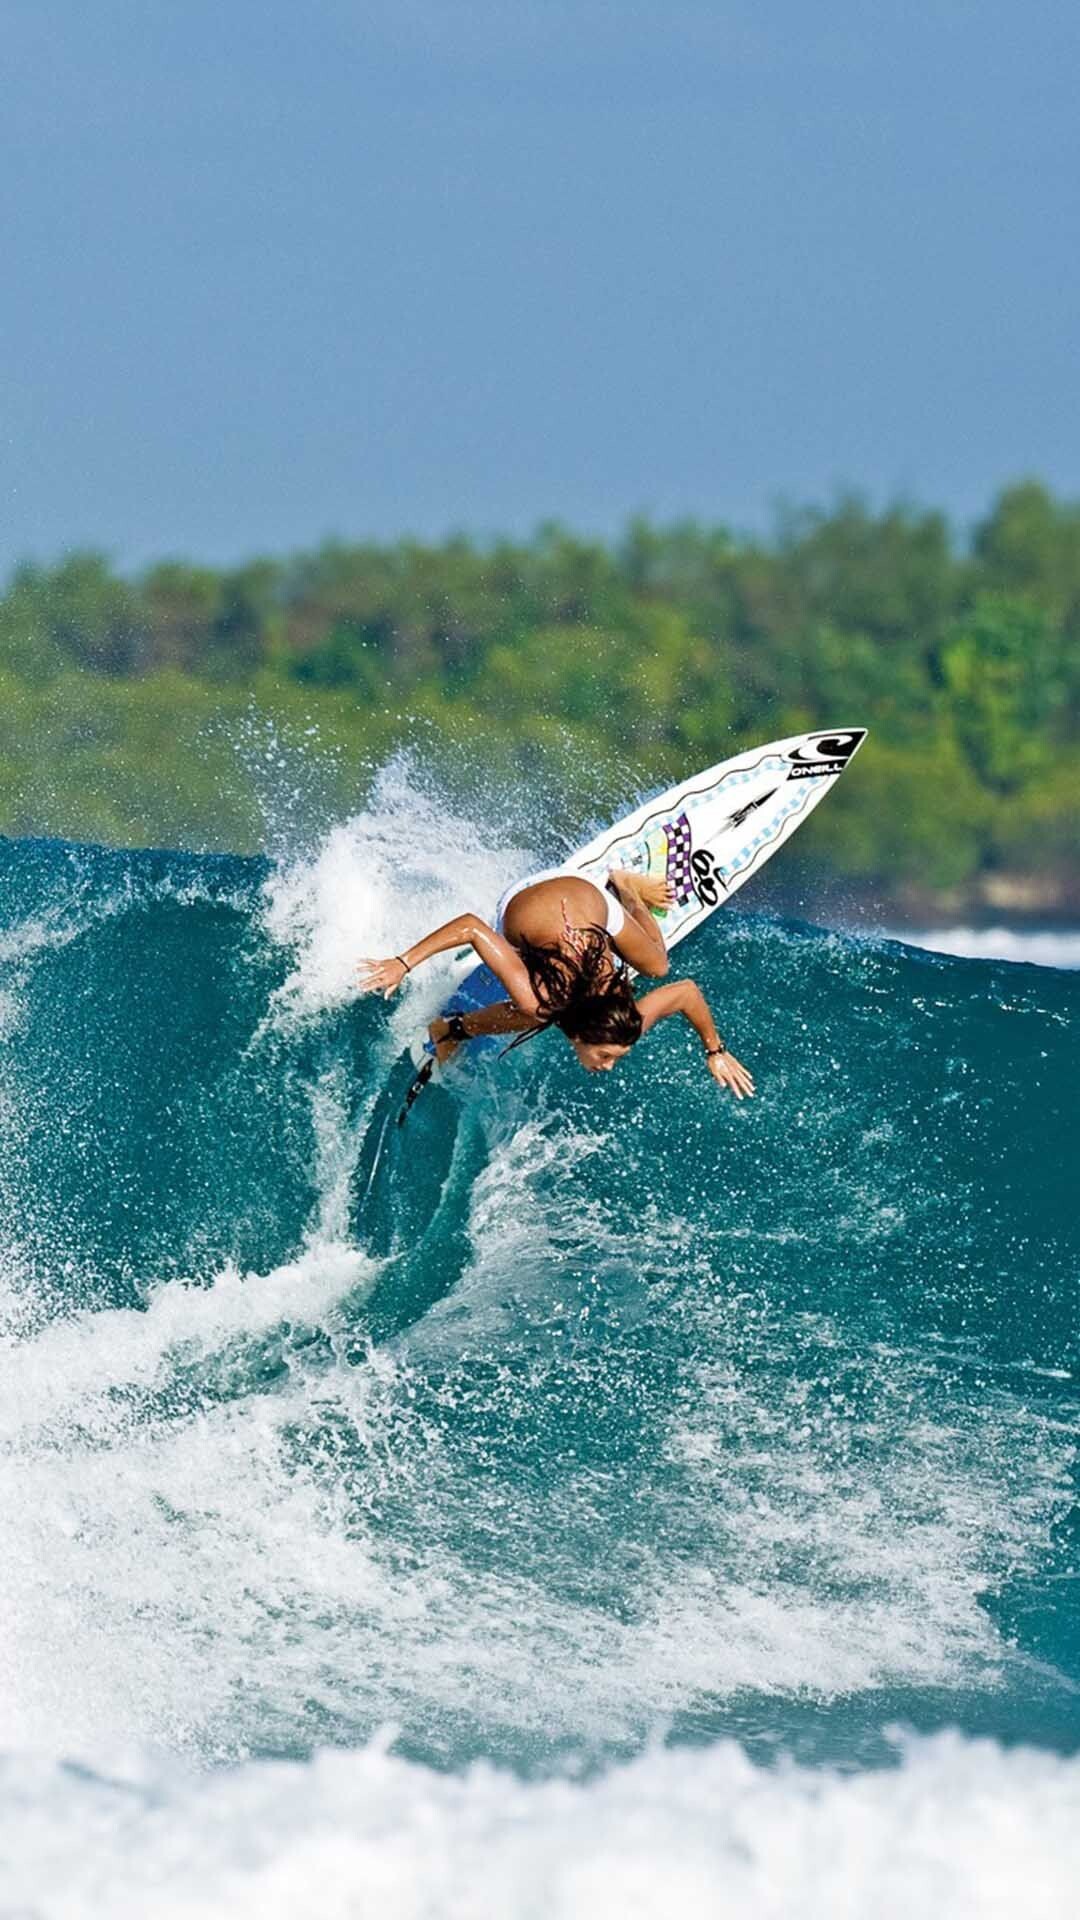 Girl Surfing: 360 Air style water tricks, Olympic athlete, Big wave surfing style. 1080x1920 Full HD Background.